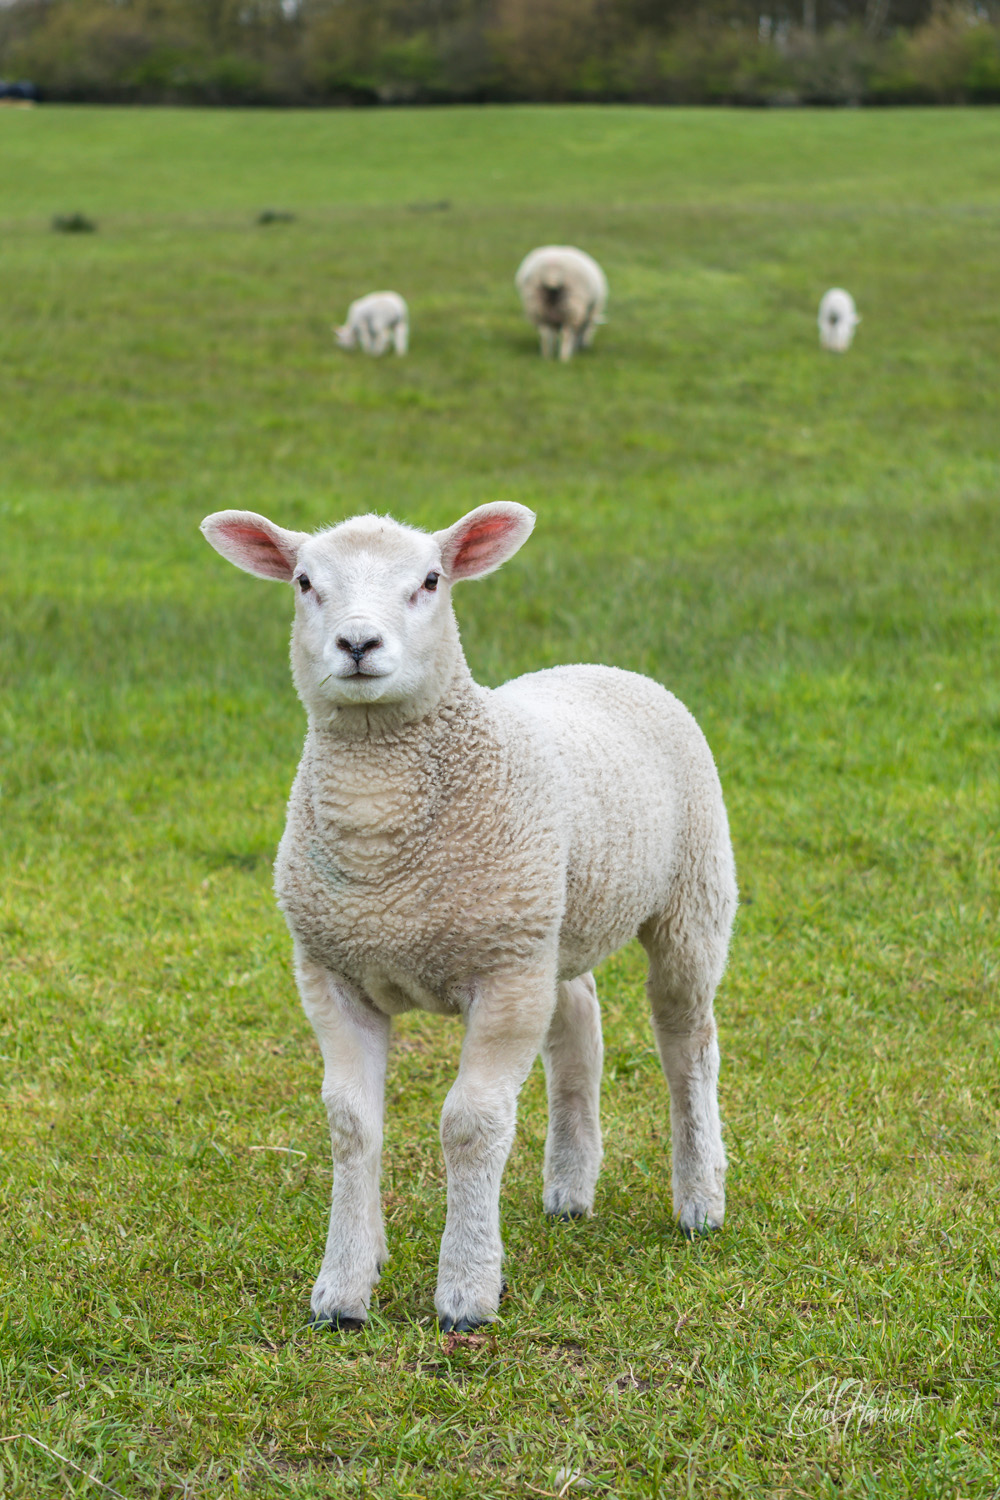 Photograph of a lamb standing